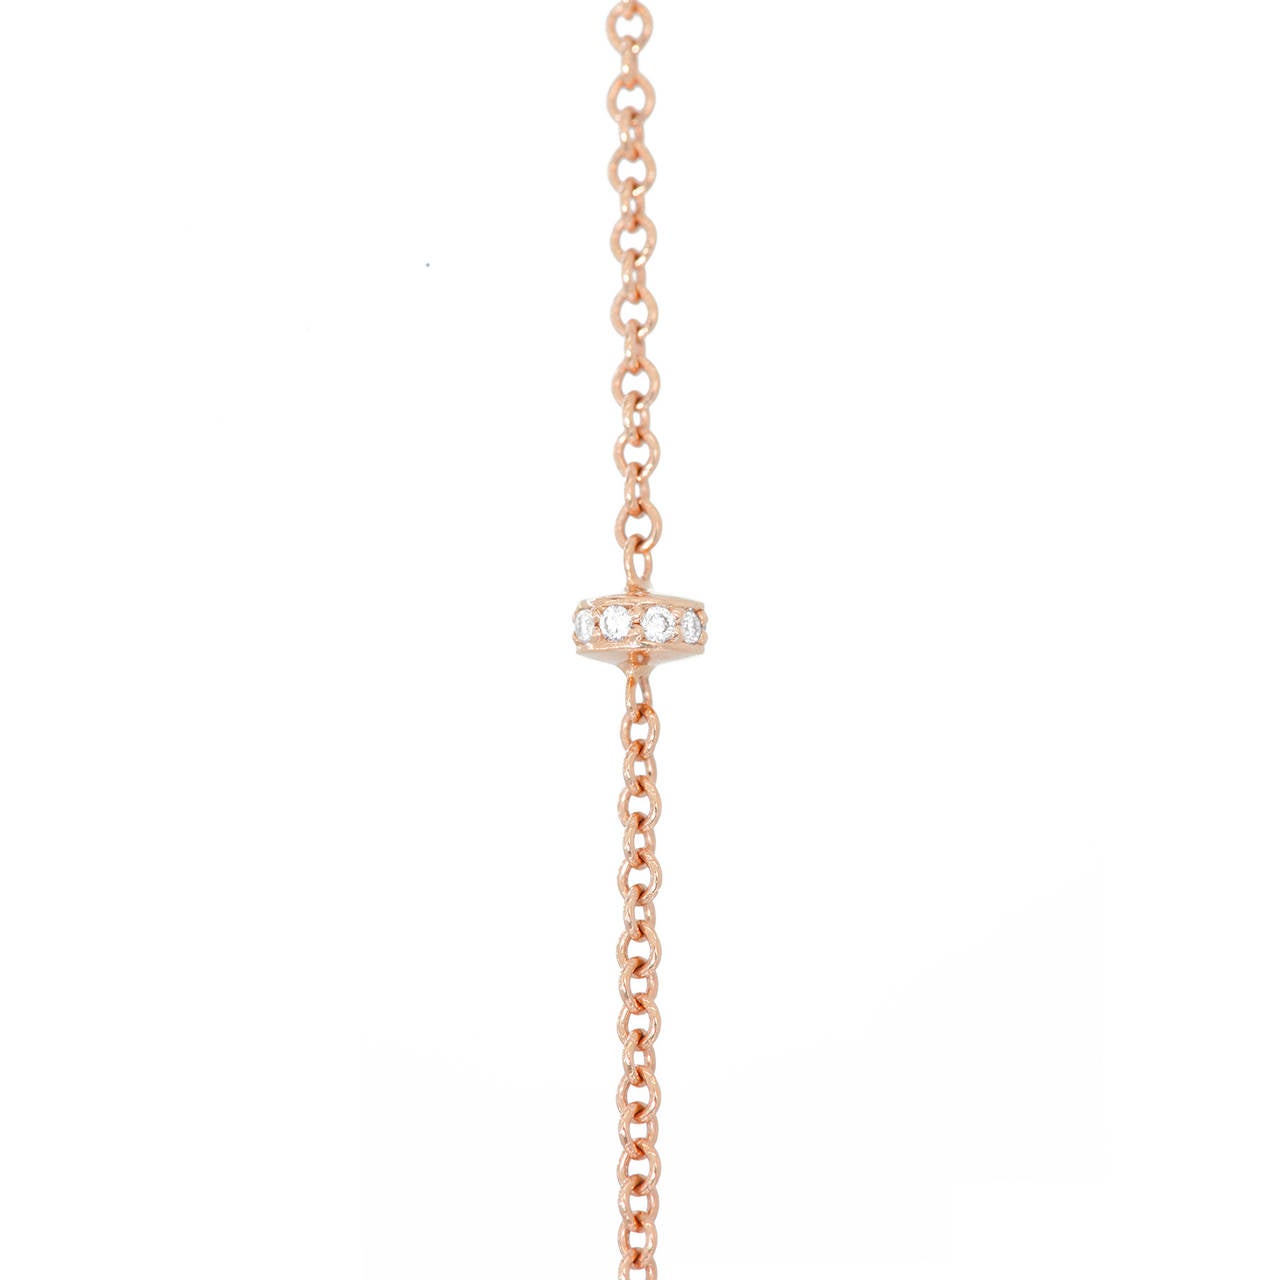 From the Wired Collection, a pendant in 18k rose gold with 21 cts of loose madeira and honey citrines, reverse-set white sapphire bottom cap (0.60 ct), bale and six roundels with white diamond pavé (0.35 ct). Satin finish with polished highlights.